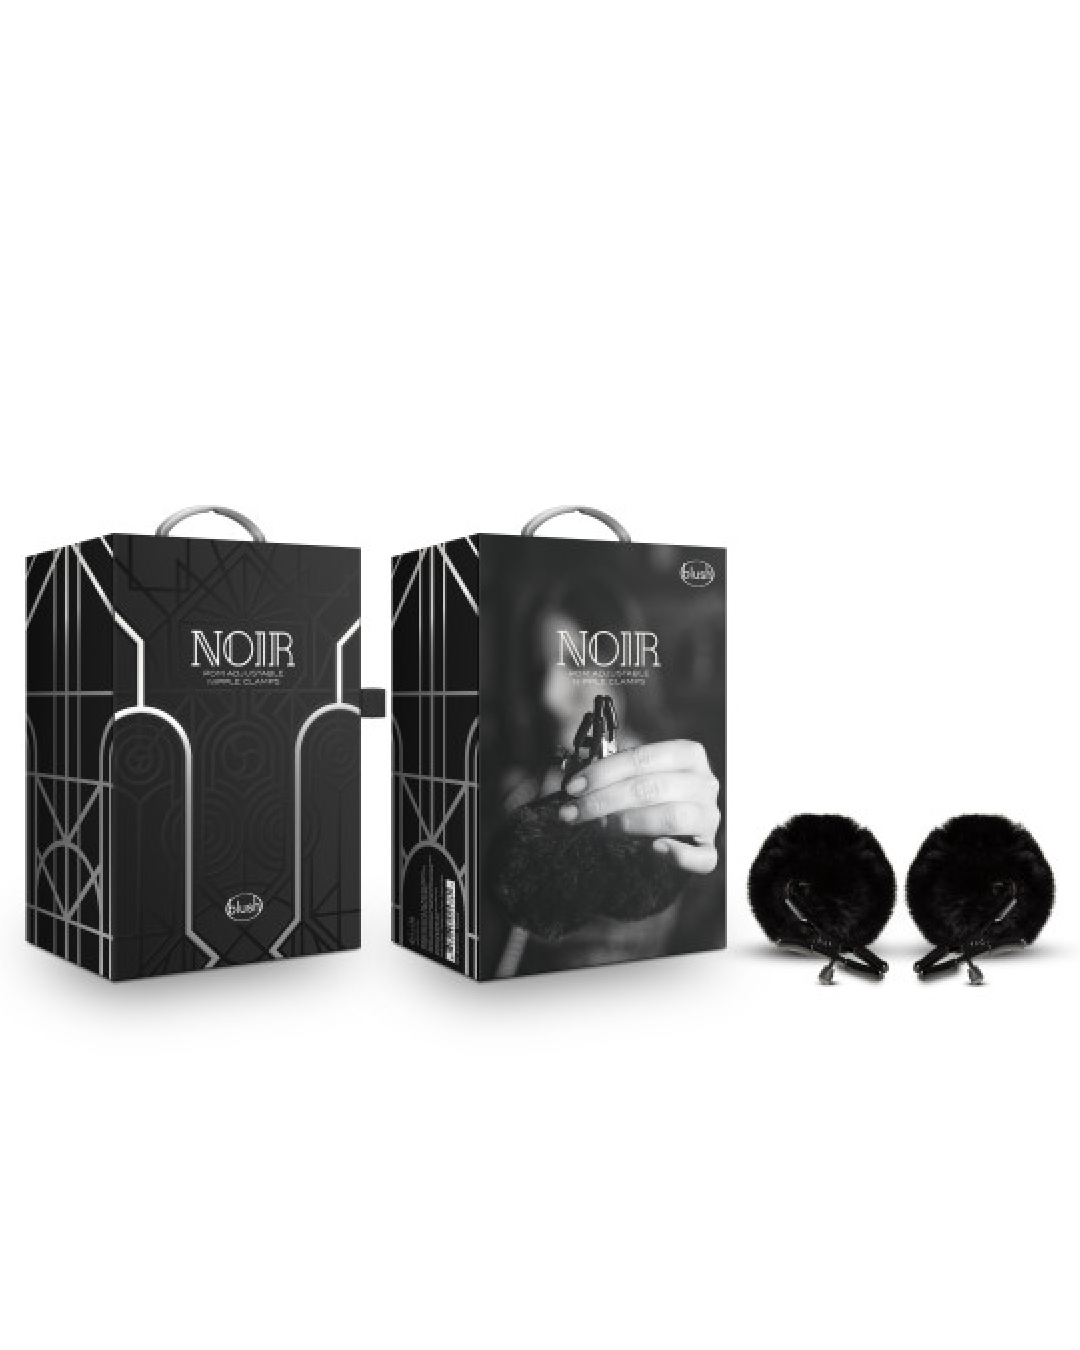 Noir Pom Nipple Clamps by Blush Novelties box and product on white background 